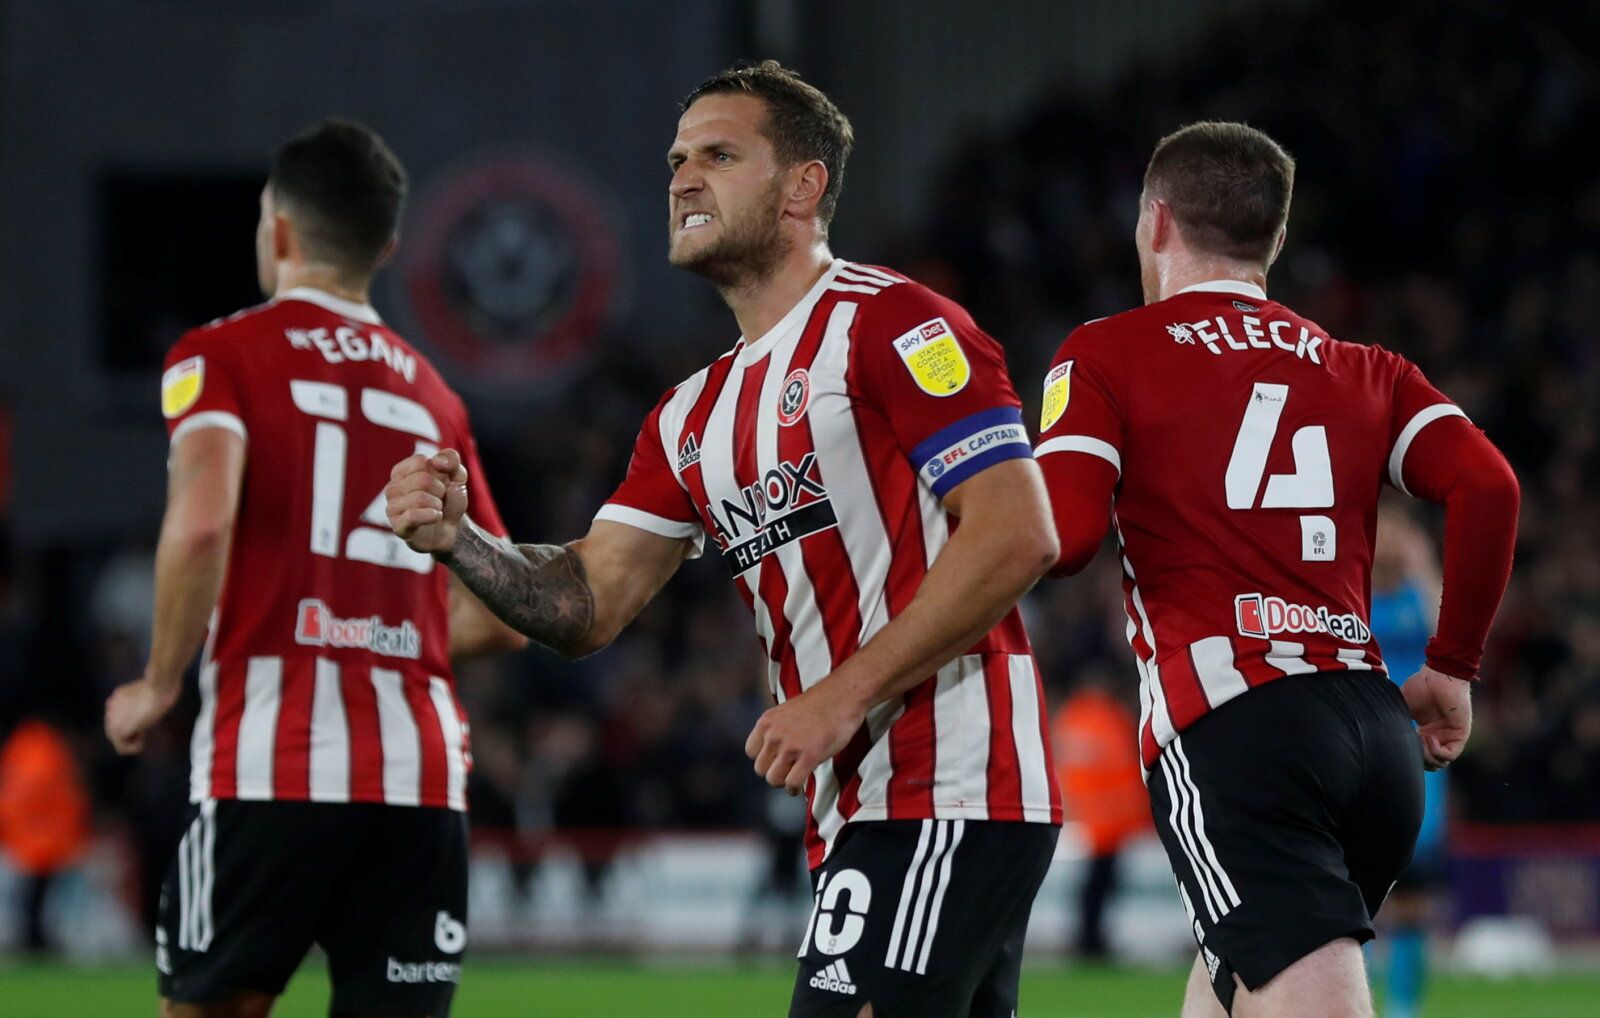 Soccer Football - Championship - Sheffield United v Millwall - Bramall Lane, Sheffield, Britain - October 19, 2021 Sheffield United’s Billy Sharp celebrates scoring their first goal with teammates   Action Images/Lee Smith  EDITORIAL USE ONLY. No use with unauthorized audio, video, data, fixture lists, club/league logos or "live" services. Online in-match use limited to 75 images, no video emulation. No use in betting, games or single club/league/player publications.  Please contact your account